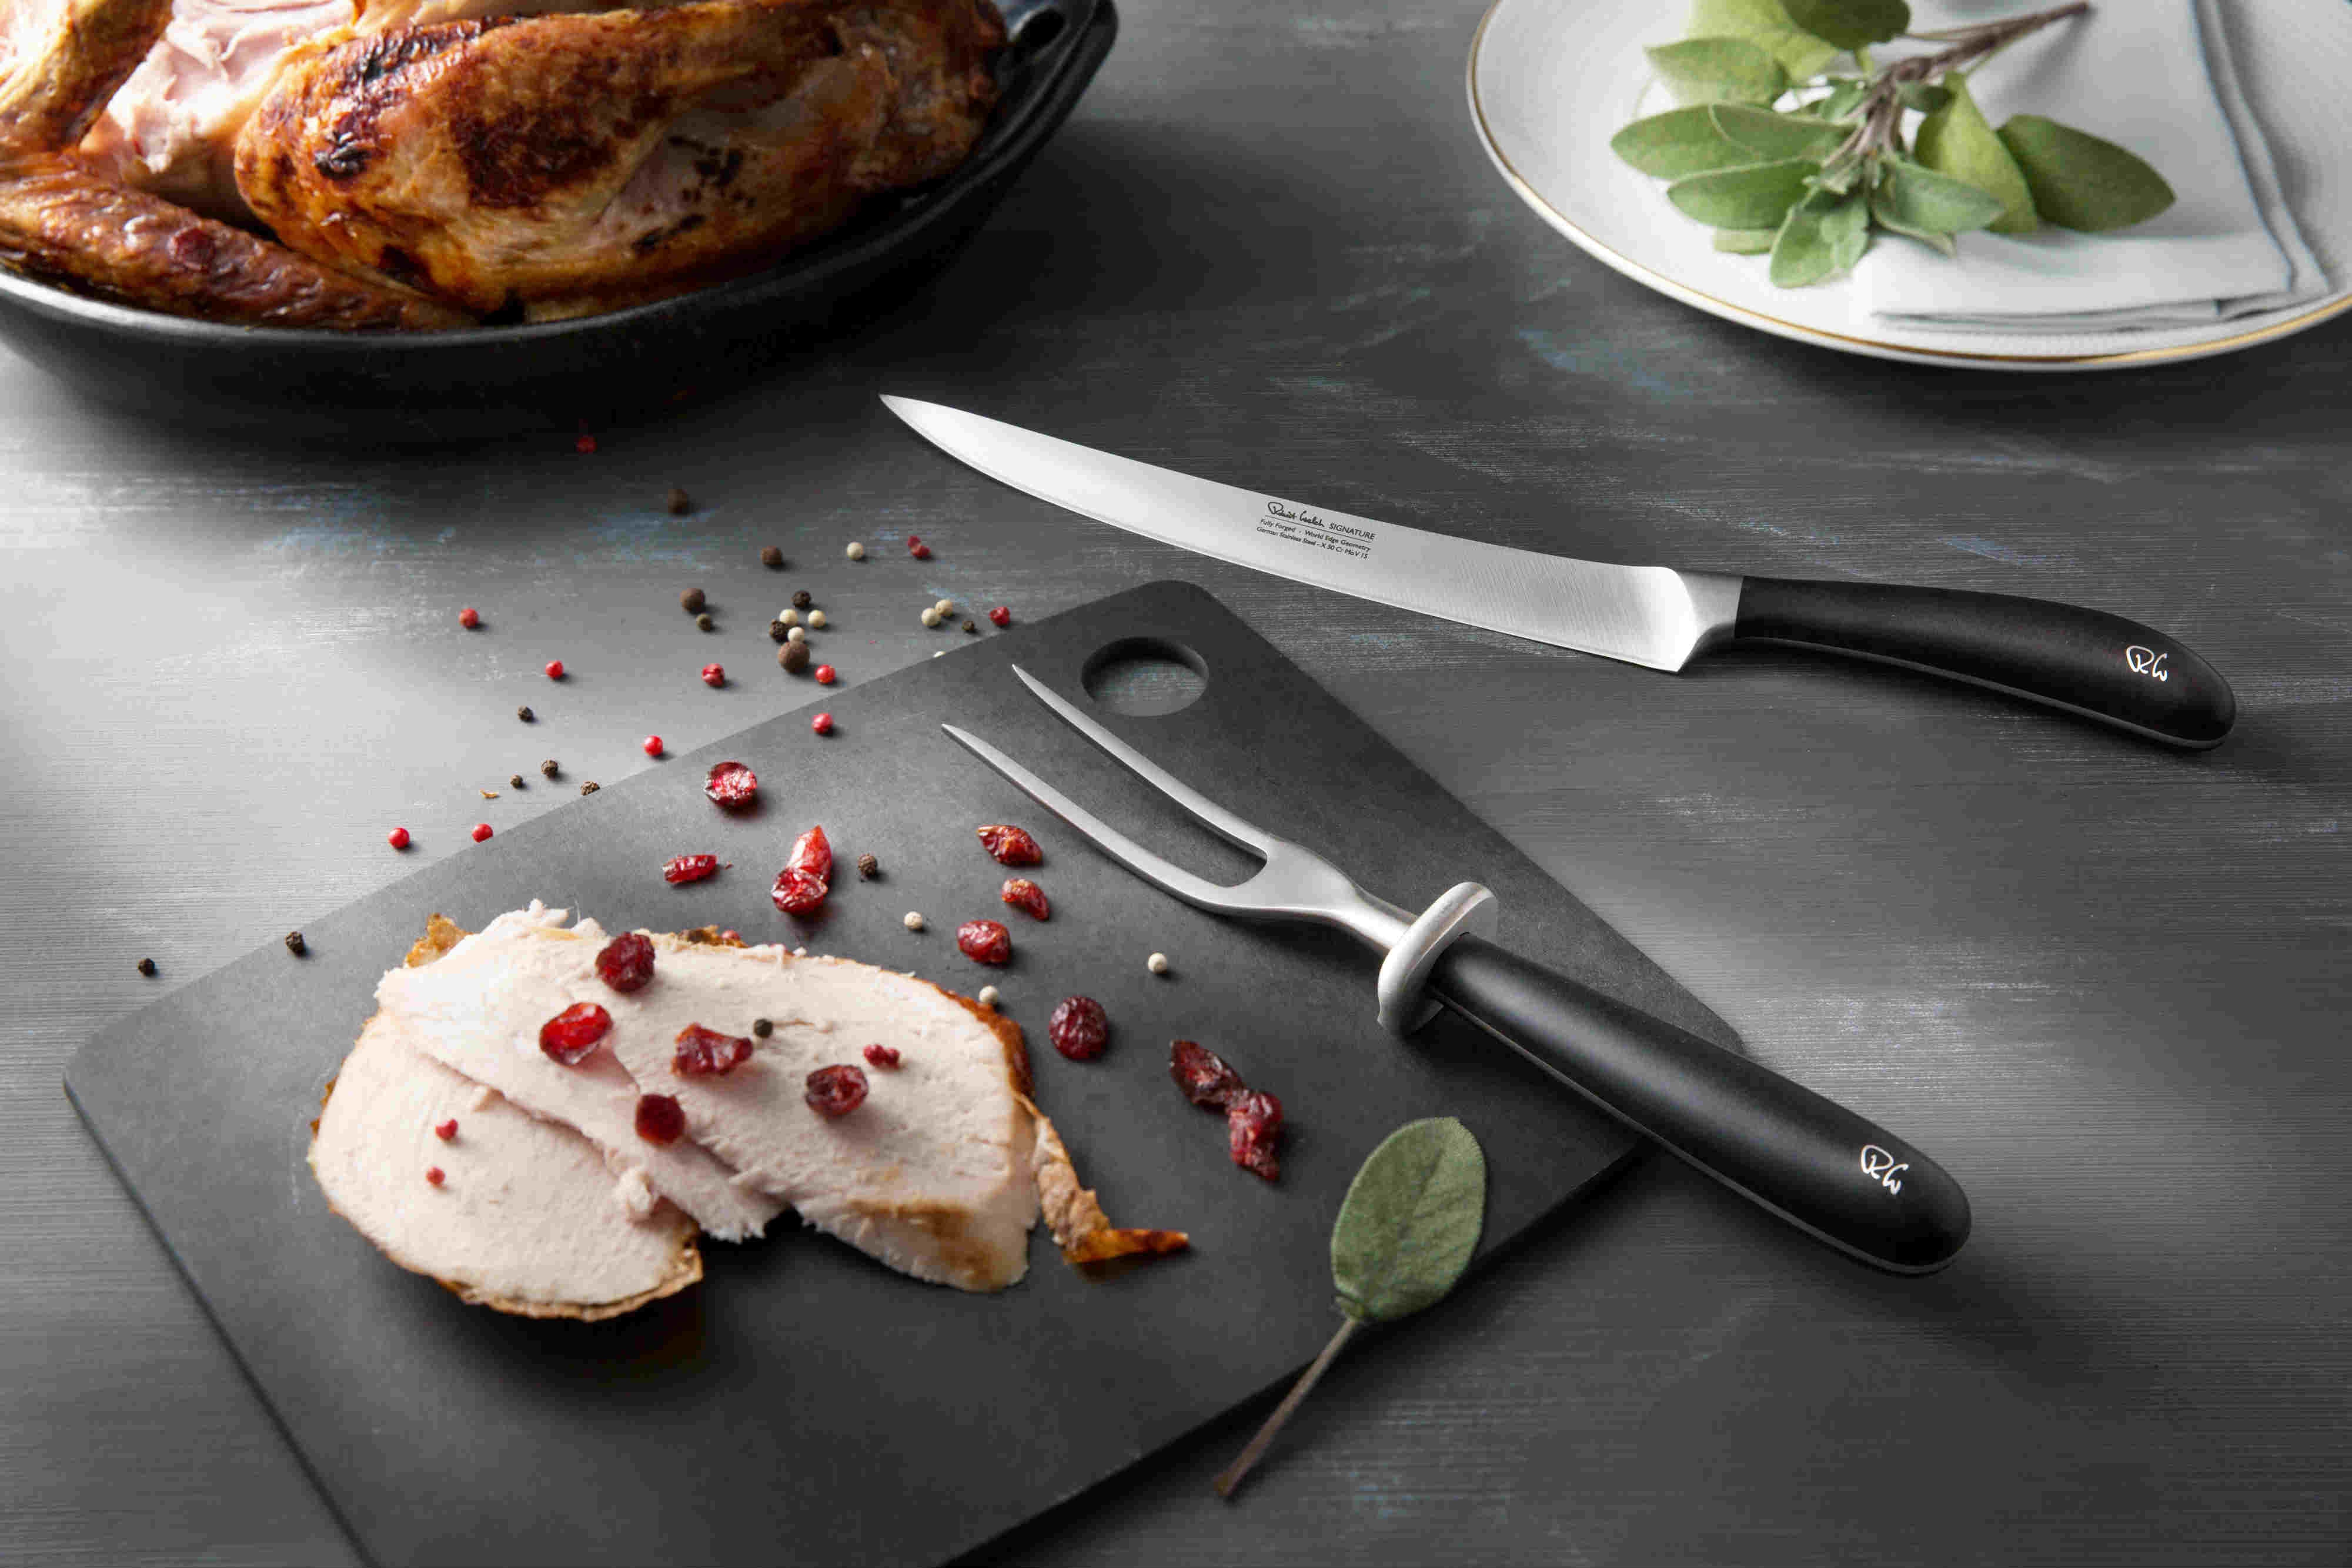 Multi award-winning designs - Robert Welch Cutlery and Kitchen Knives. Some Limited Edition sets on special offer while stocks last.